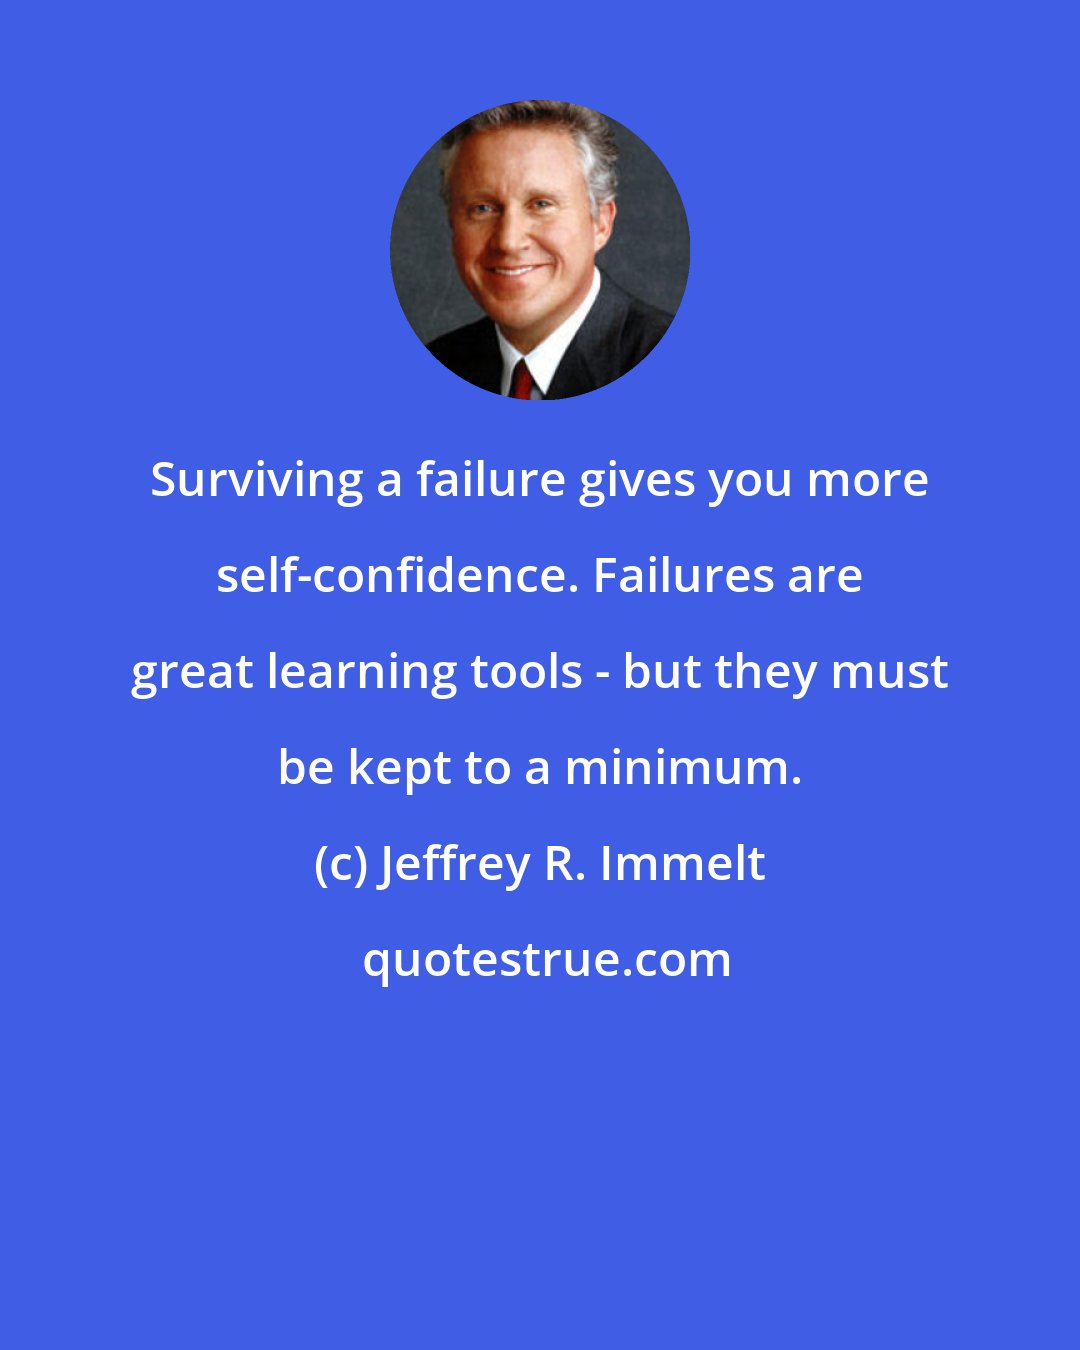 Jeffrey R. Immelt: Surviving a failure gives you more self-confidence. Failures are great learning tools - but they must be kept to a minimum.